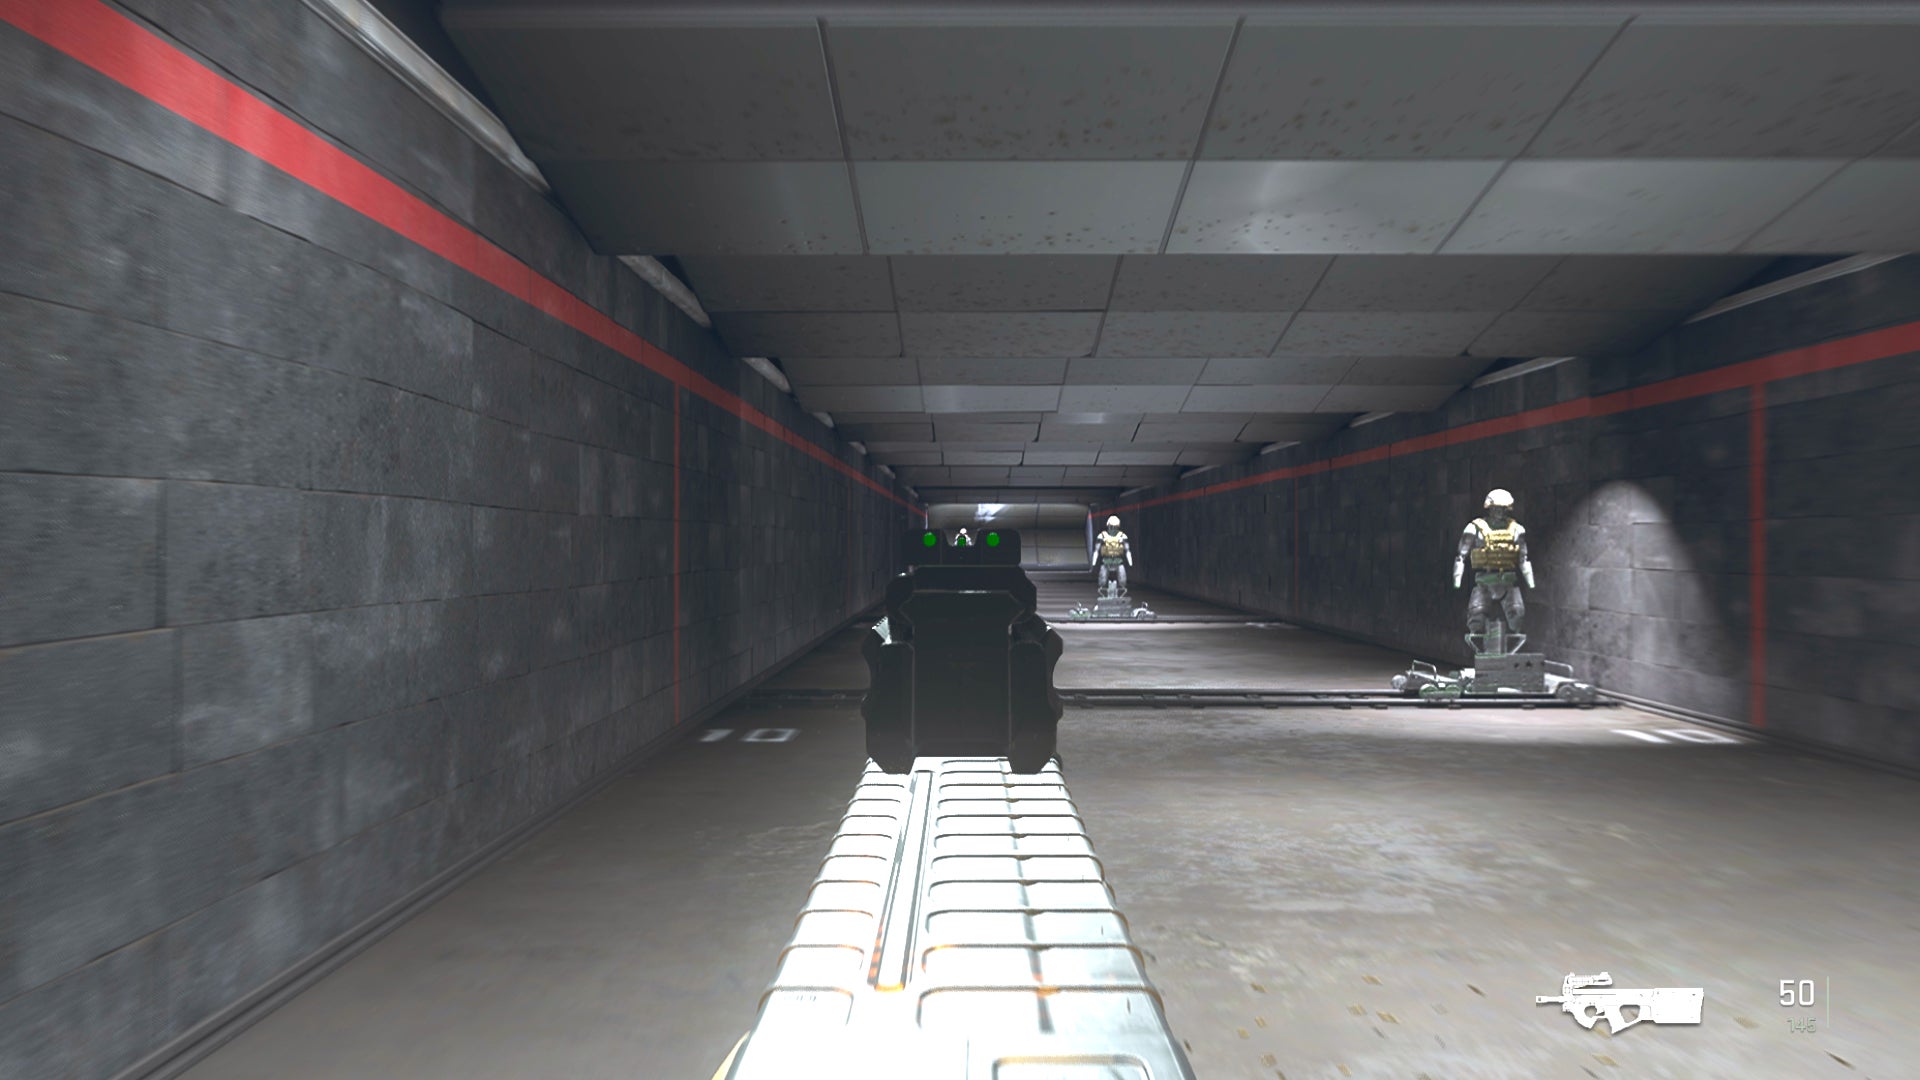 The player in Warzone 2.0 aims at a training dummy with the PDSW-528 ironsights.